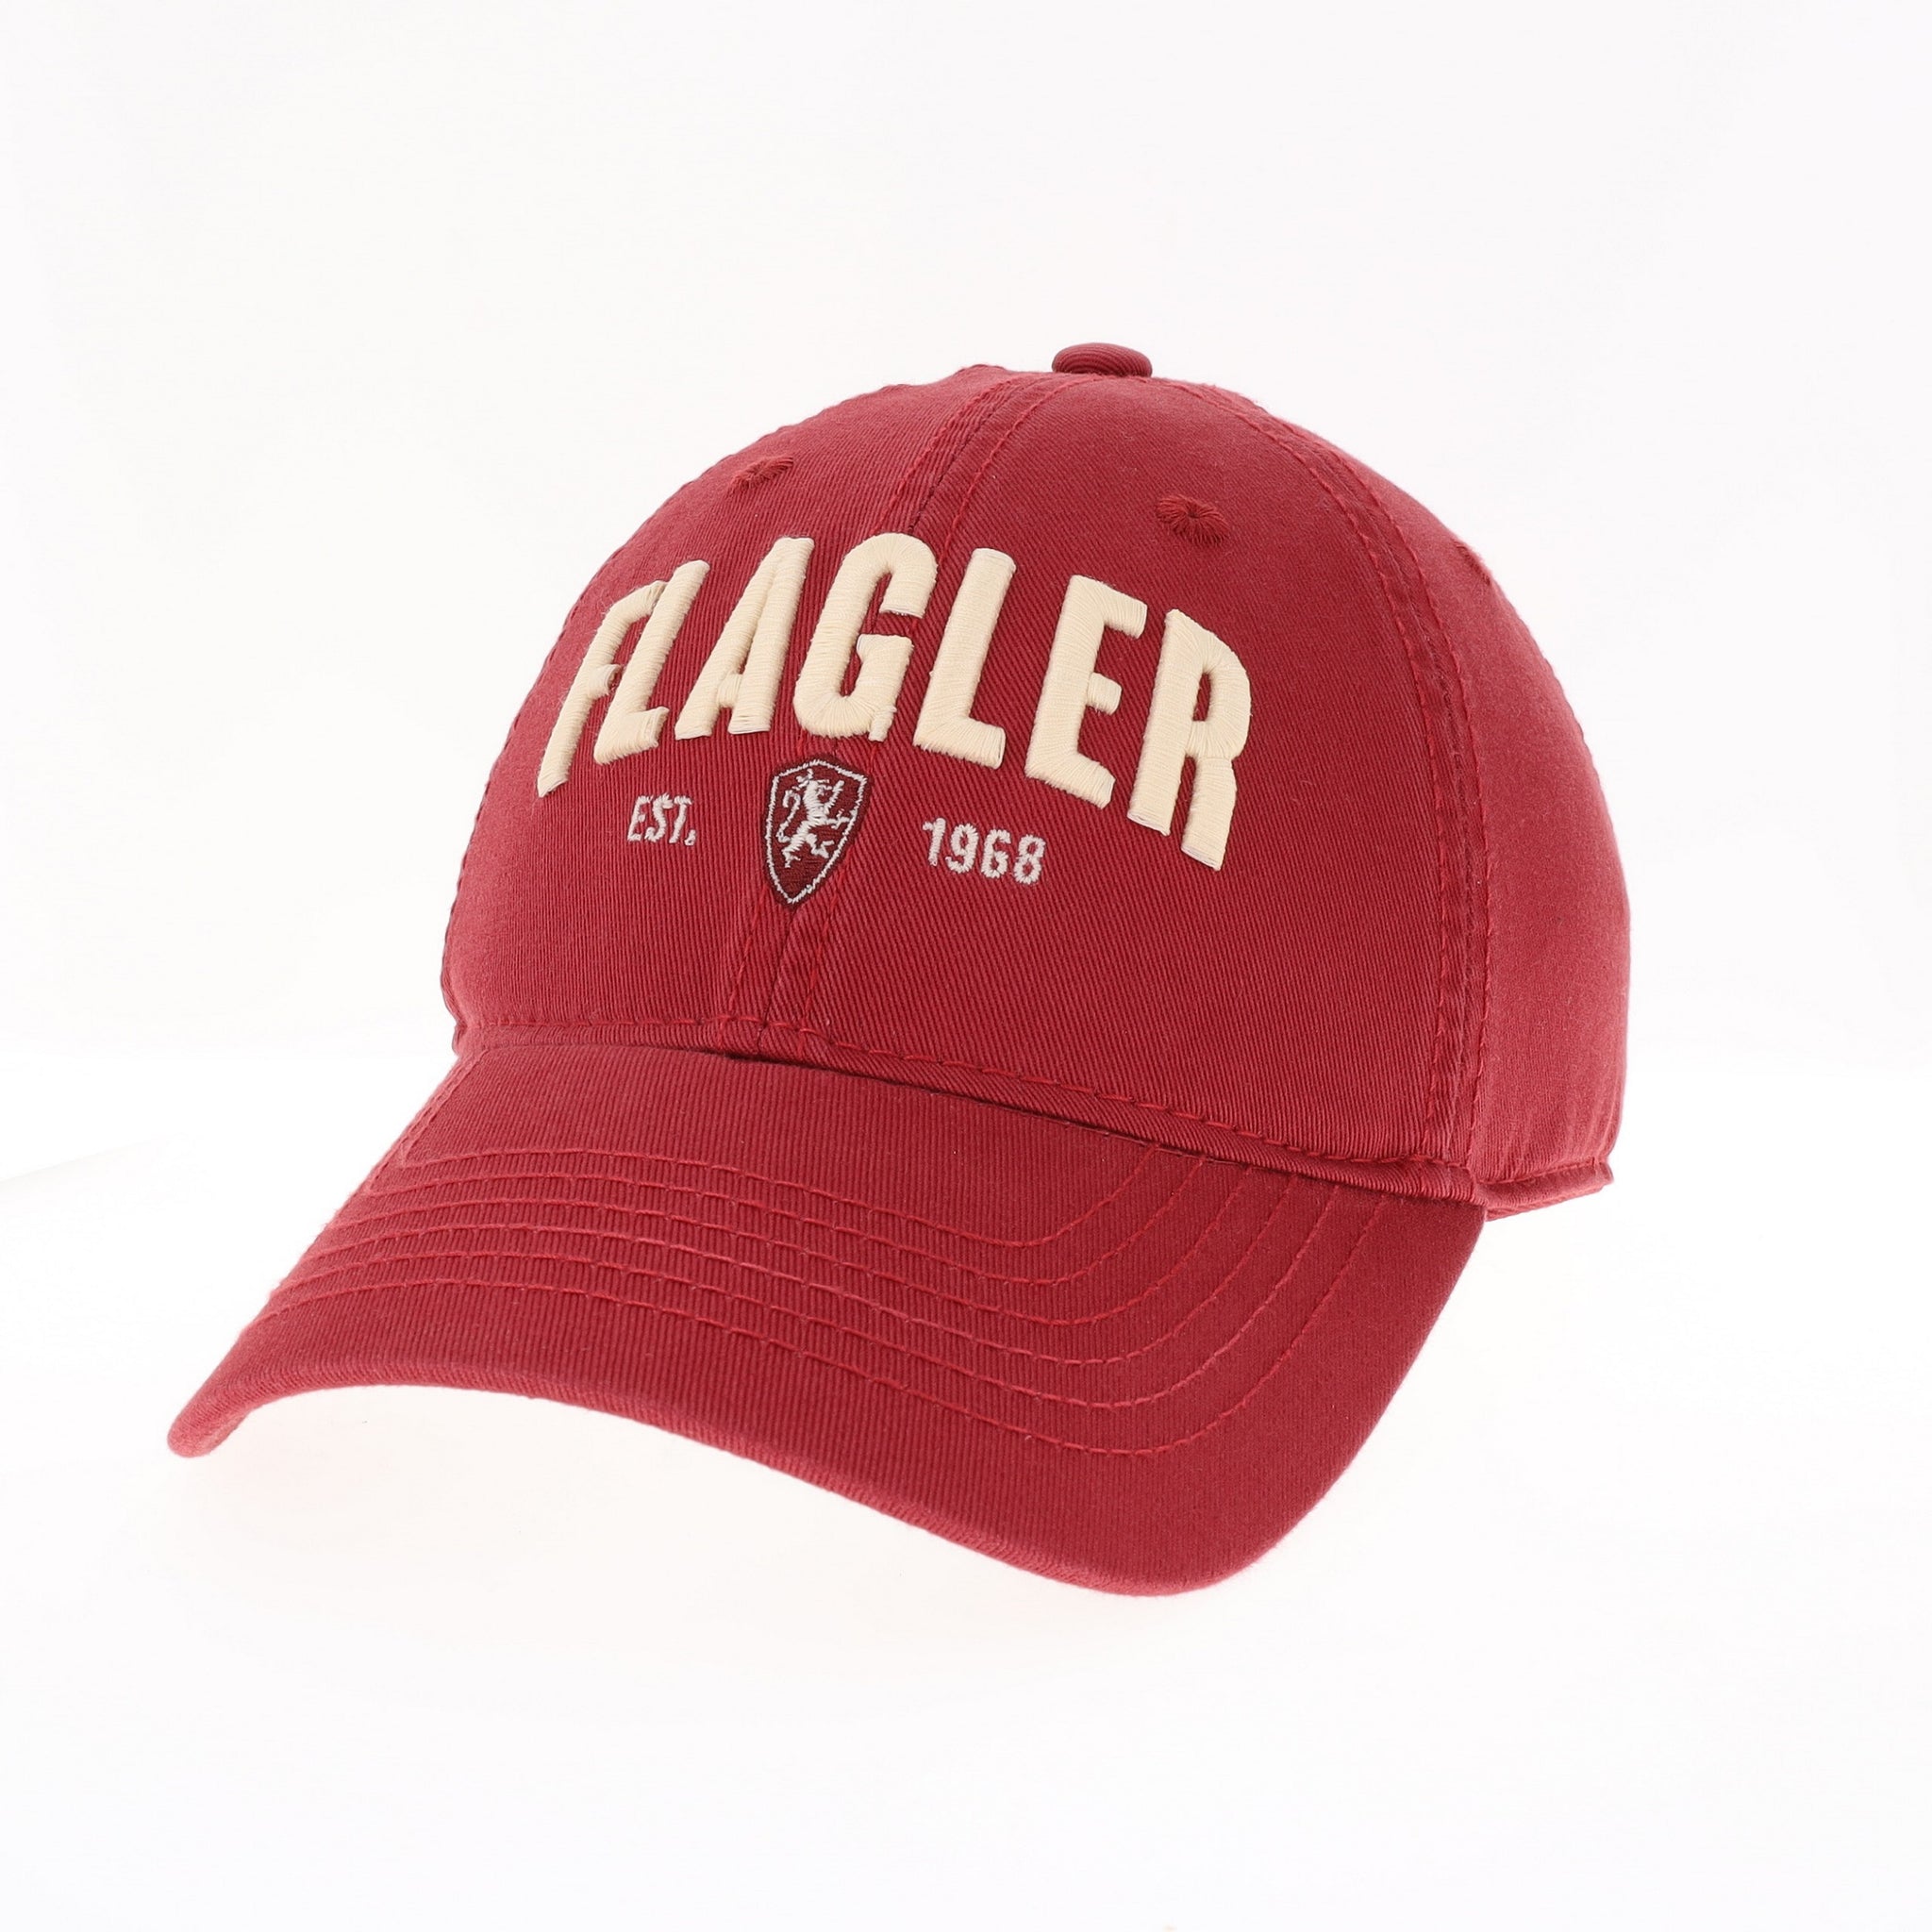 Red hat with white letters saying Flagler over white embroidr saying est. flagler college shield logo 1968